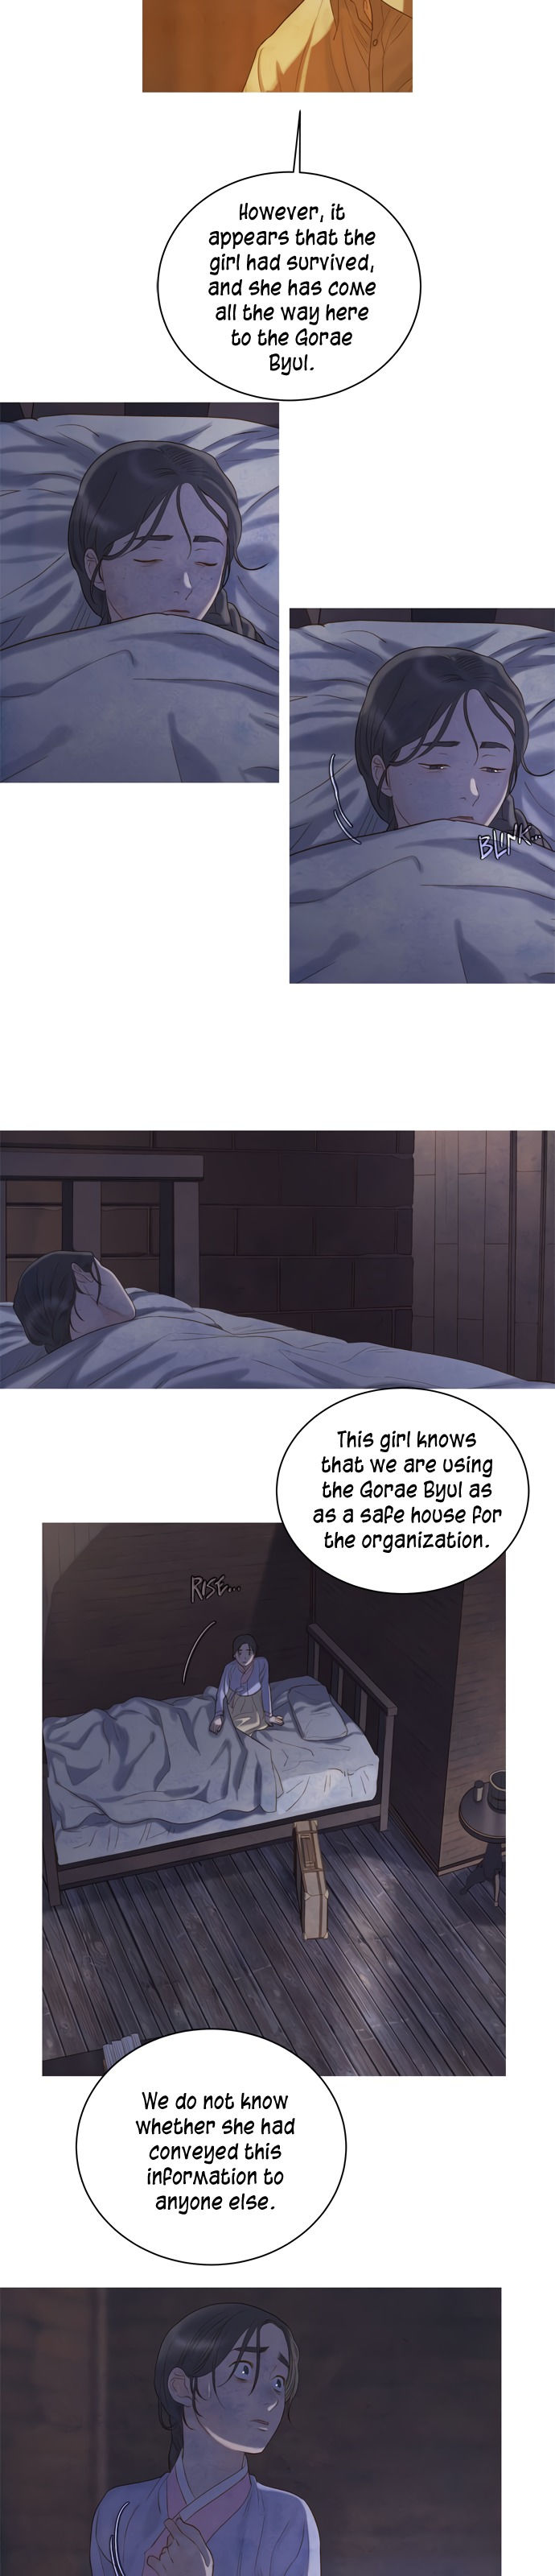 Gorae Byul - The Gyeongseong Mermaid - Chapter 18 Page 16